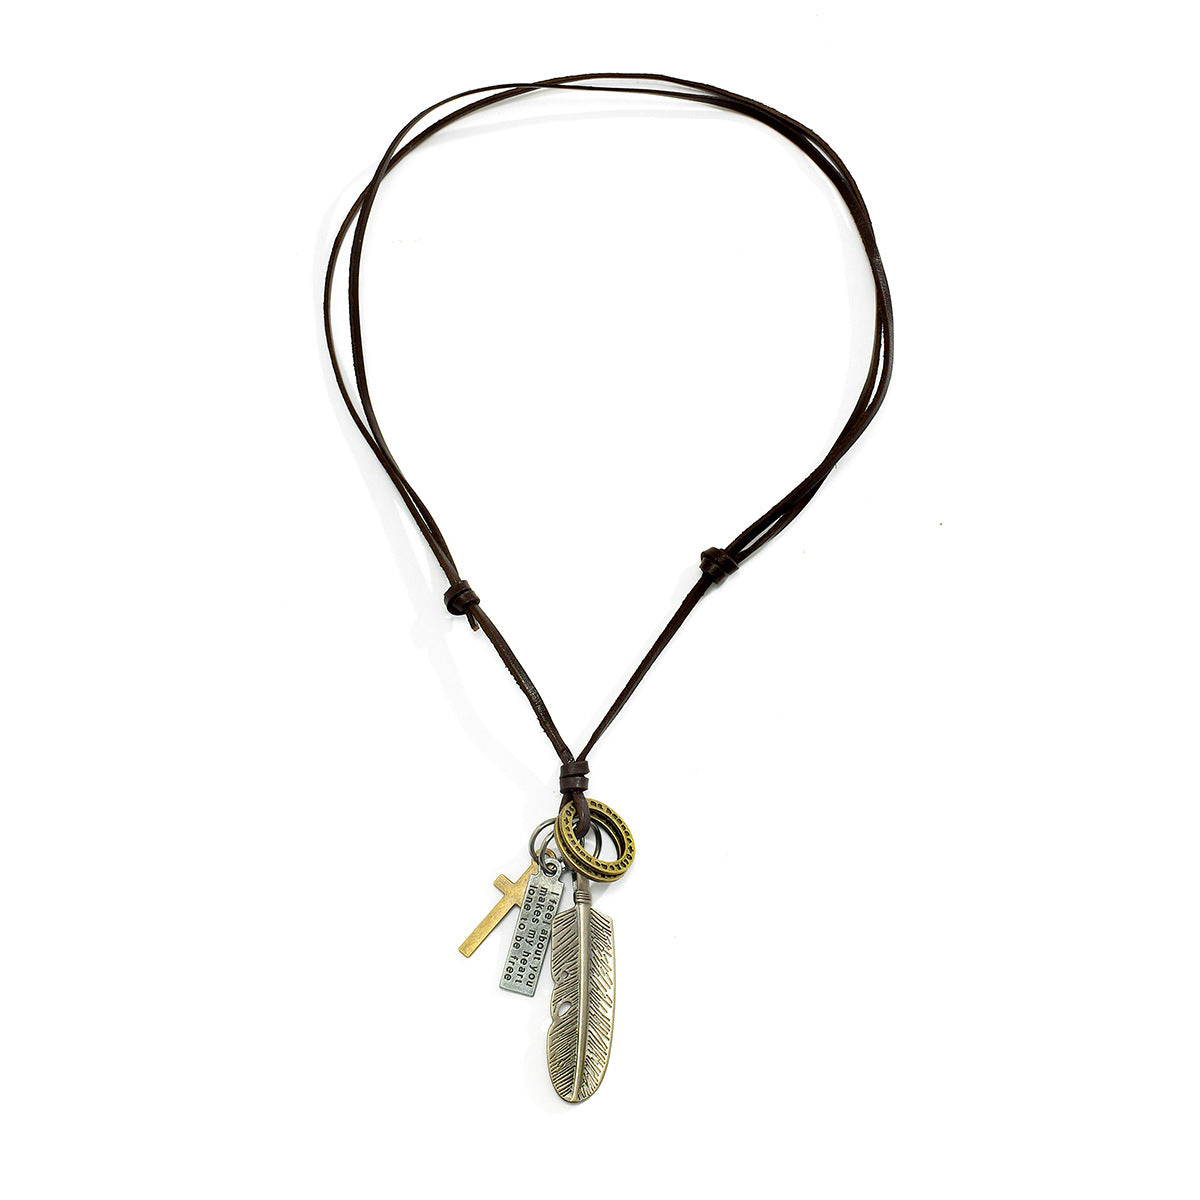 Vintage Fashion Leather Chain with Feather and Cross Design Versatile Pendant Necklace - Syble's